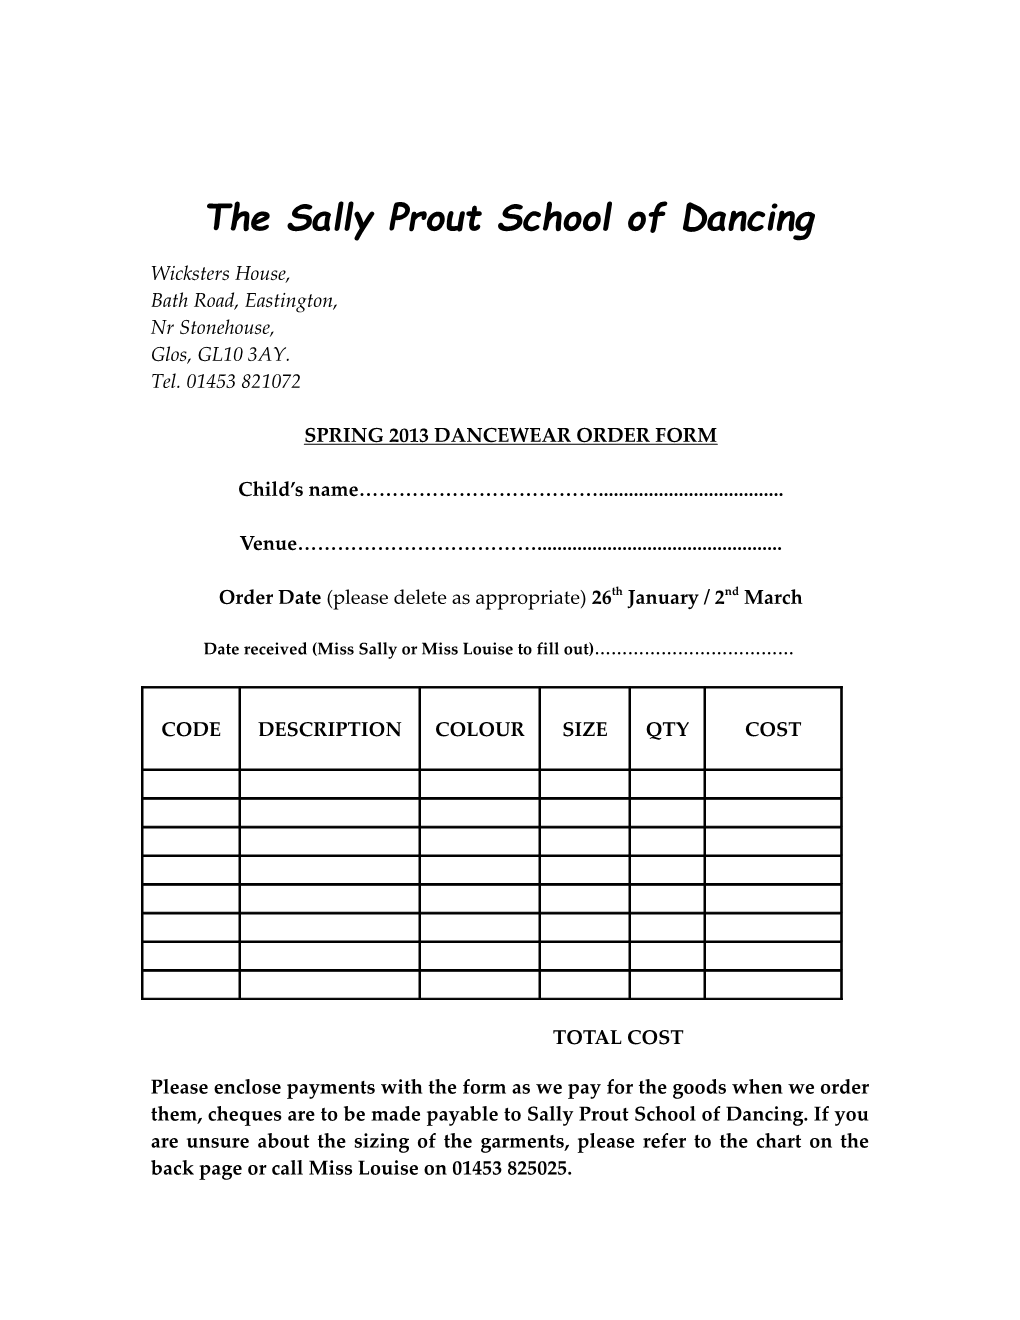 The Sally Prout School of Dancing